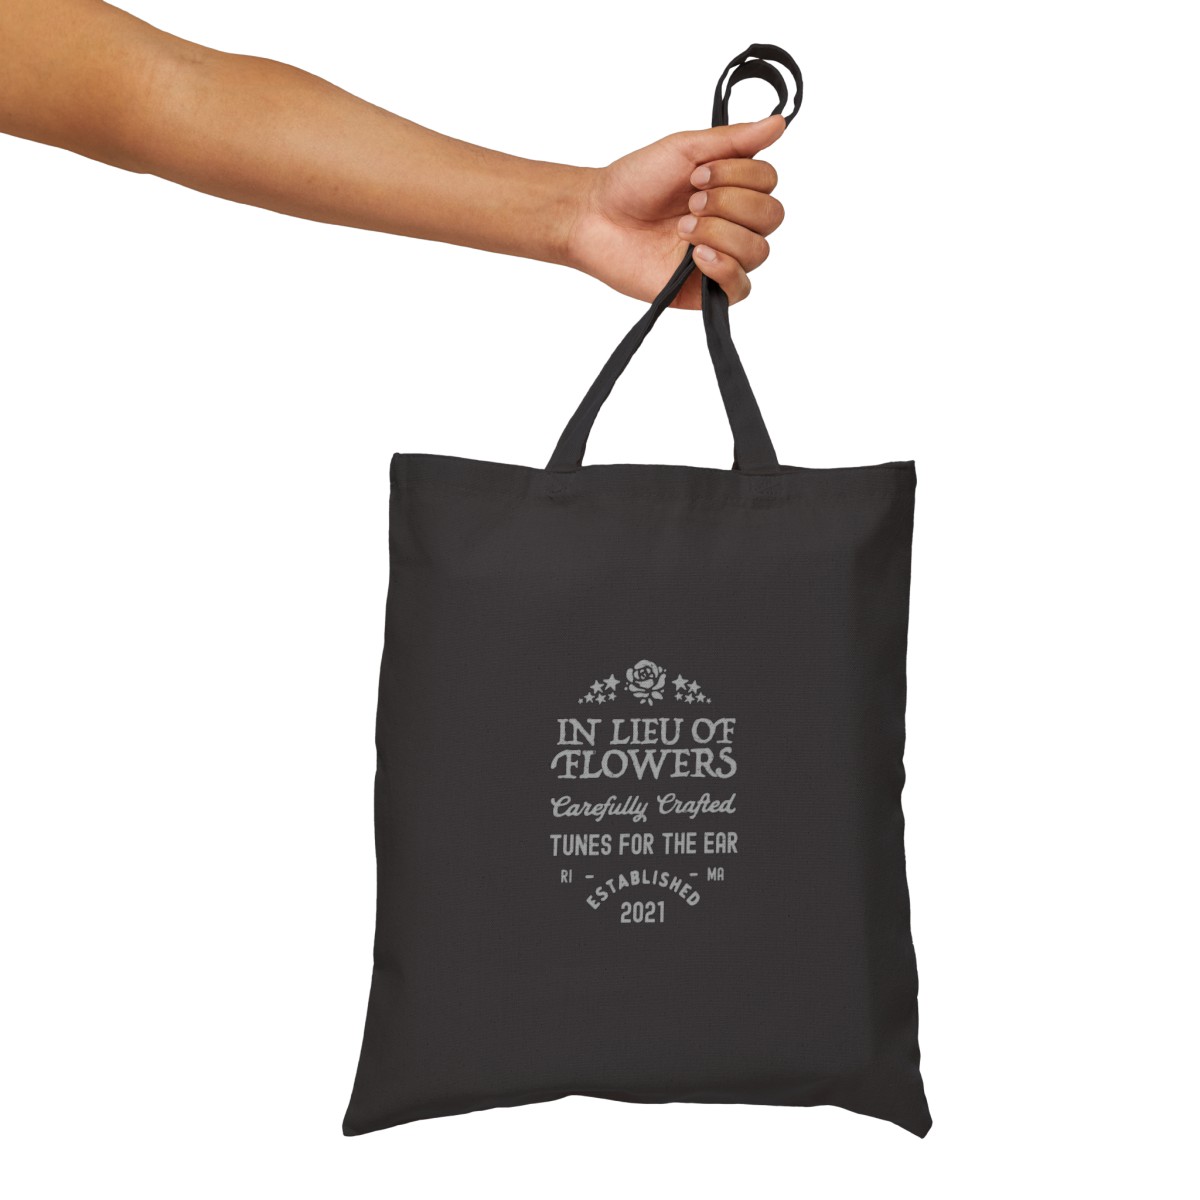 In Lieu Of Flowers Cotton Canvas Tote Bag product thumbnail image